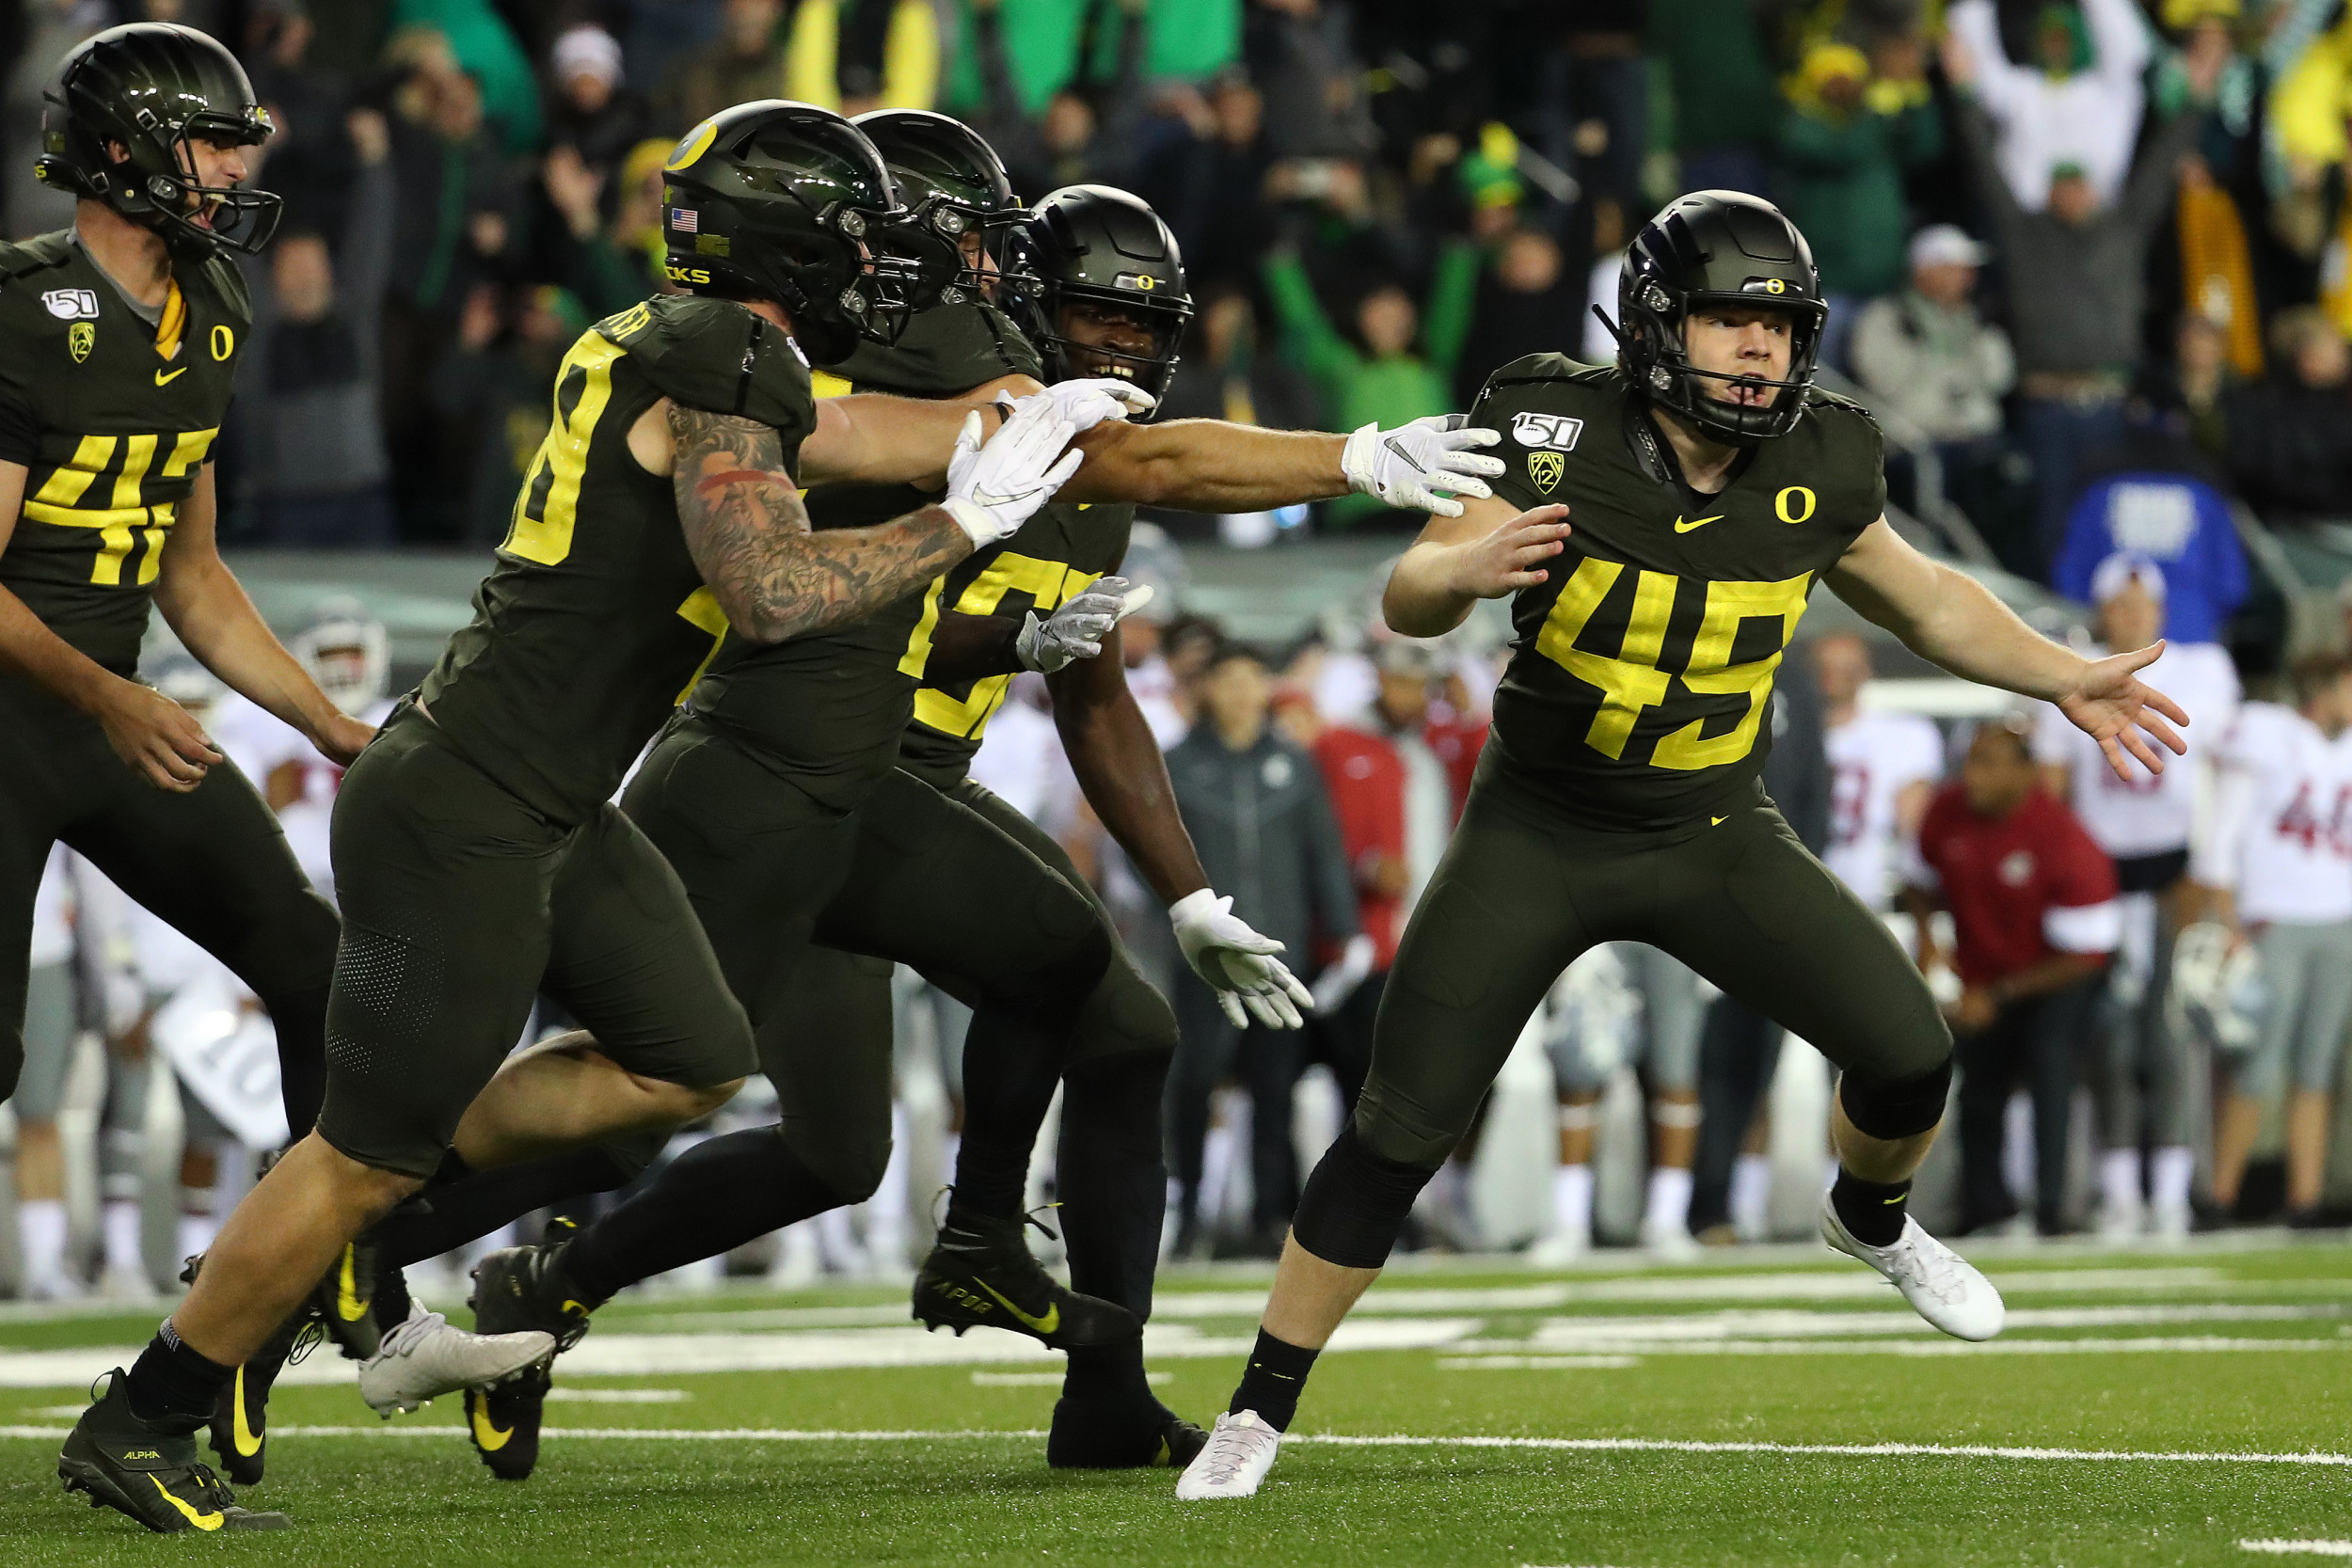 College Football TV Schedule 2019: Where to Watch Oregon vs. USC, TV Channel, Live Stream and Odds